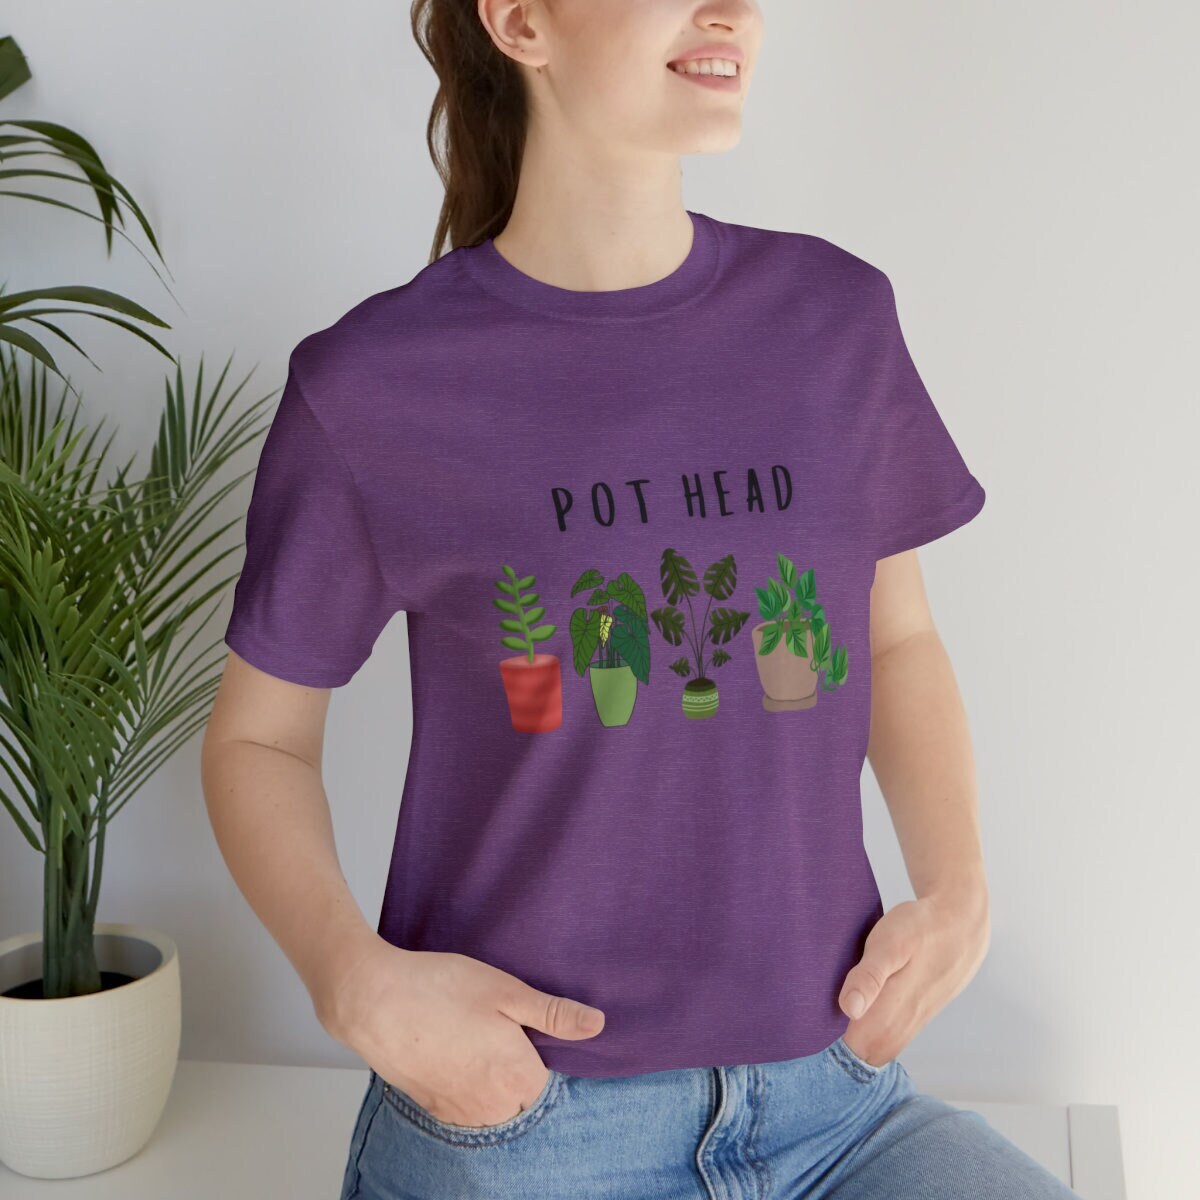 Pot Head T-Shirt - Shirt with plants - Gift for plant lover - Green Thumb Shirt